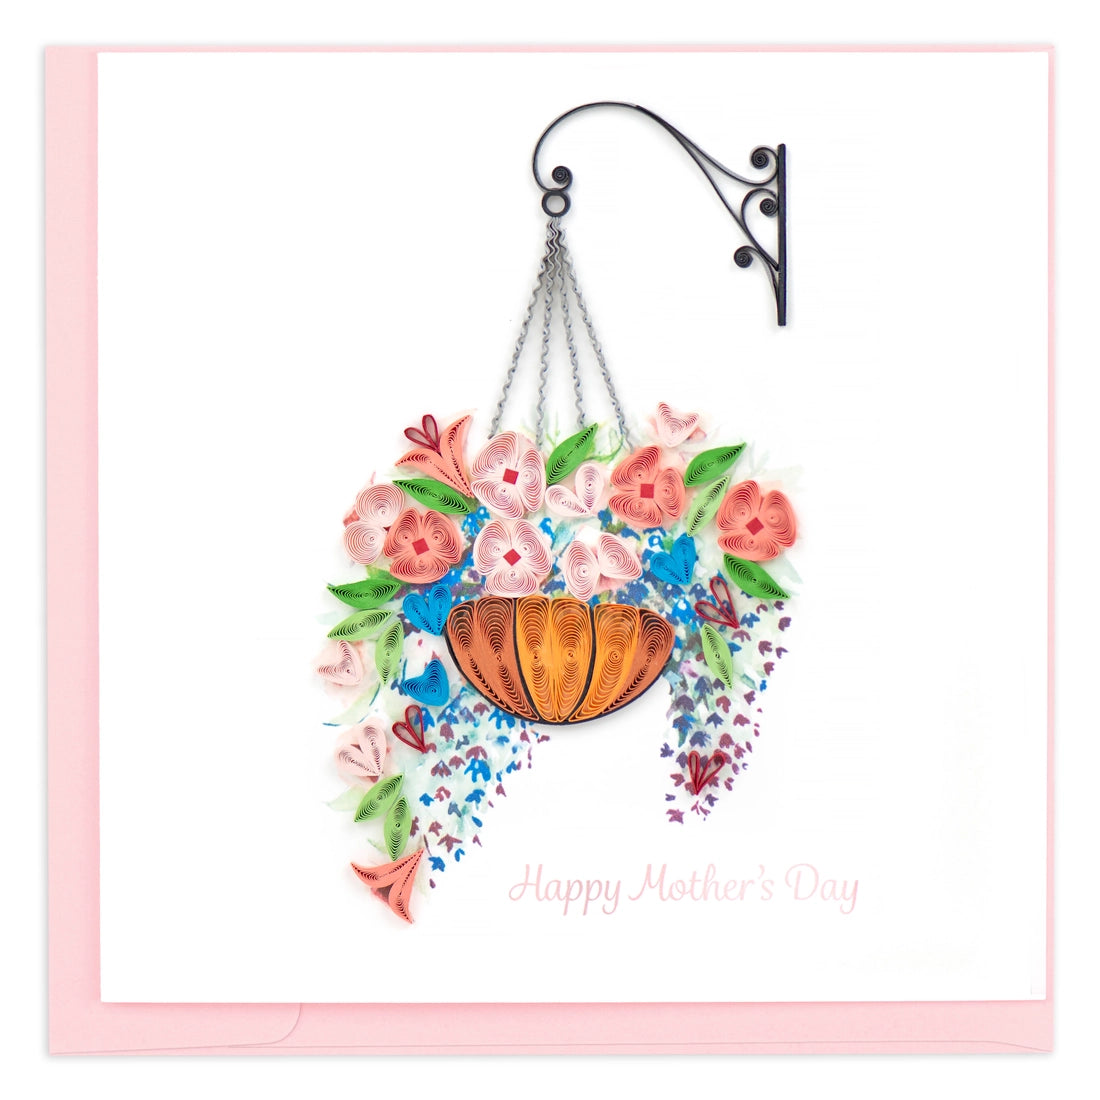 Hanging Flower Basket Mother's Day Quilling Card